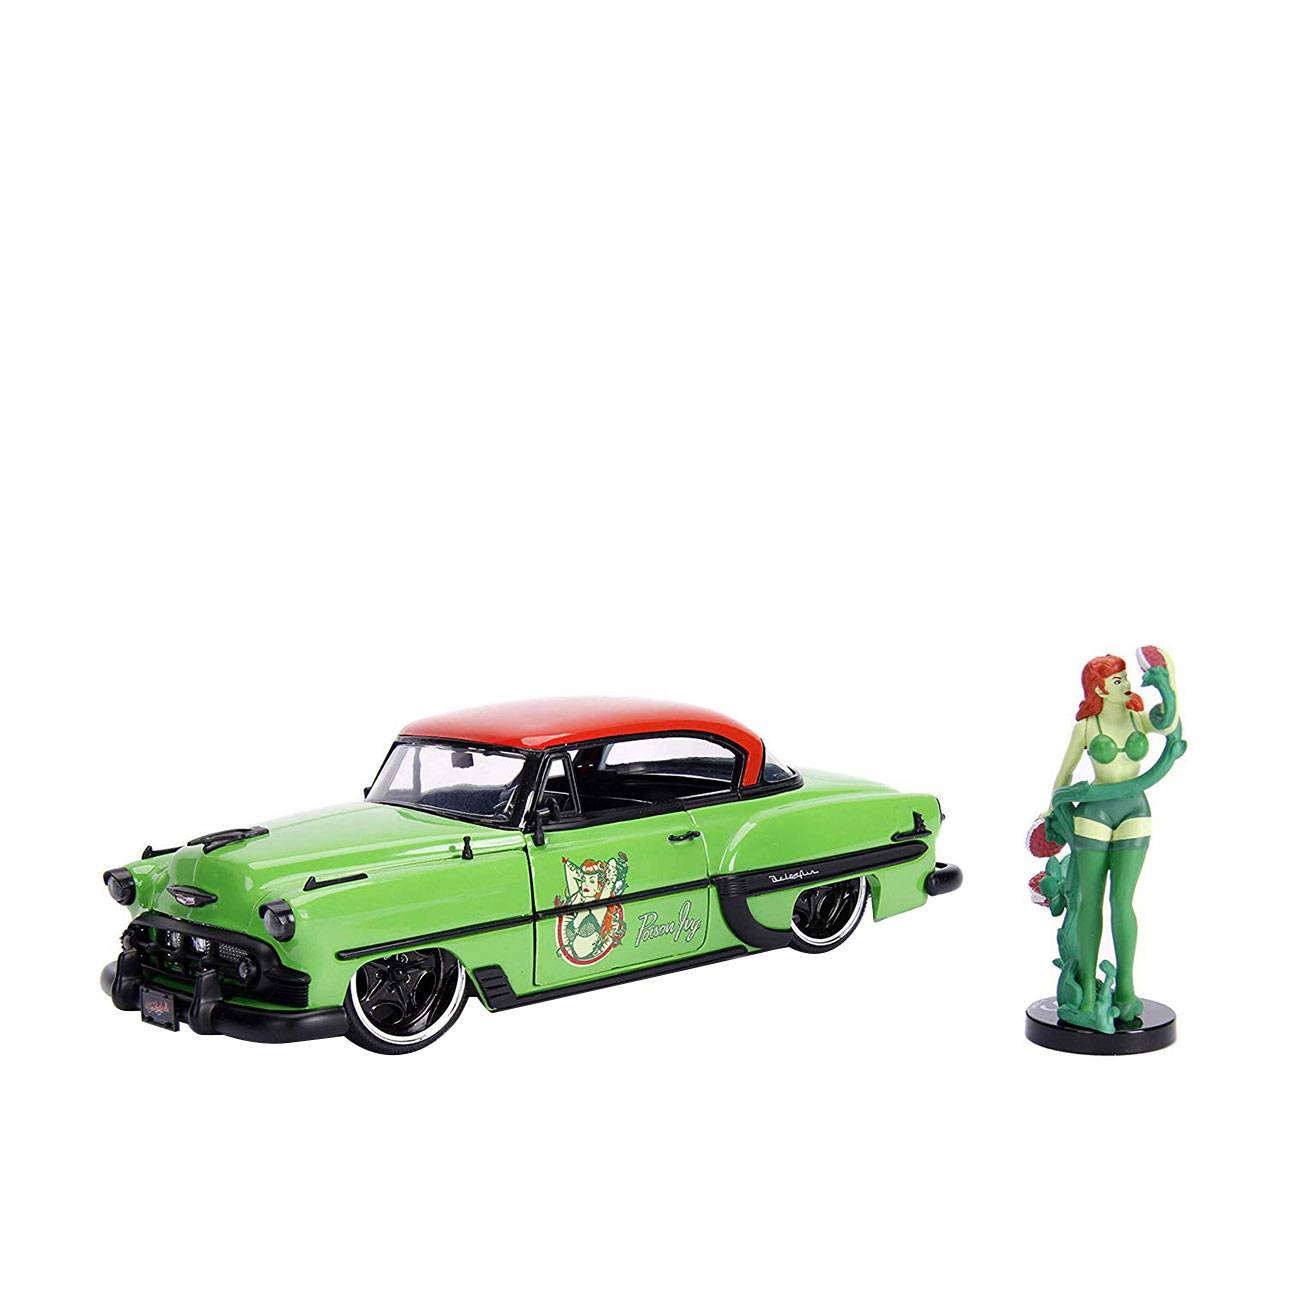 CHEVY BEL AIR YEAR 1953 WITH POISON IVY DC COMICS GREEN